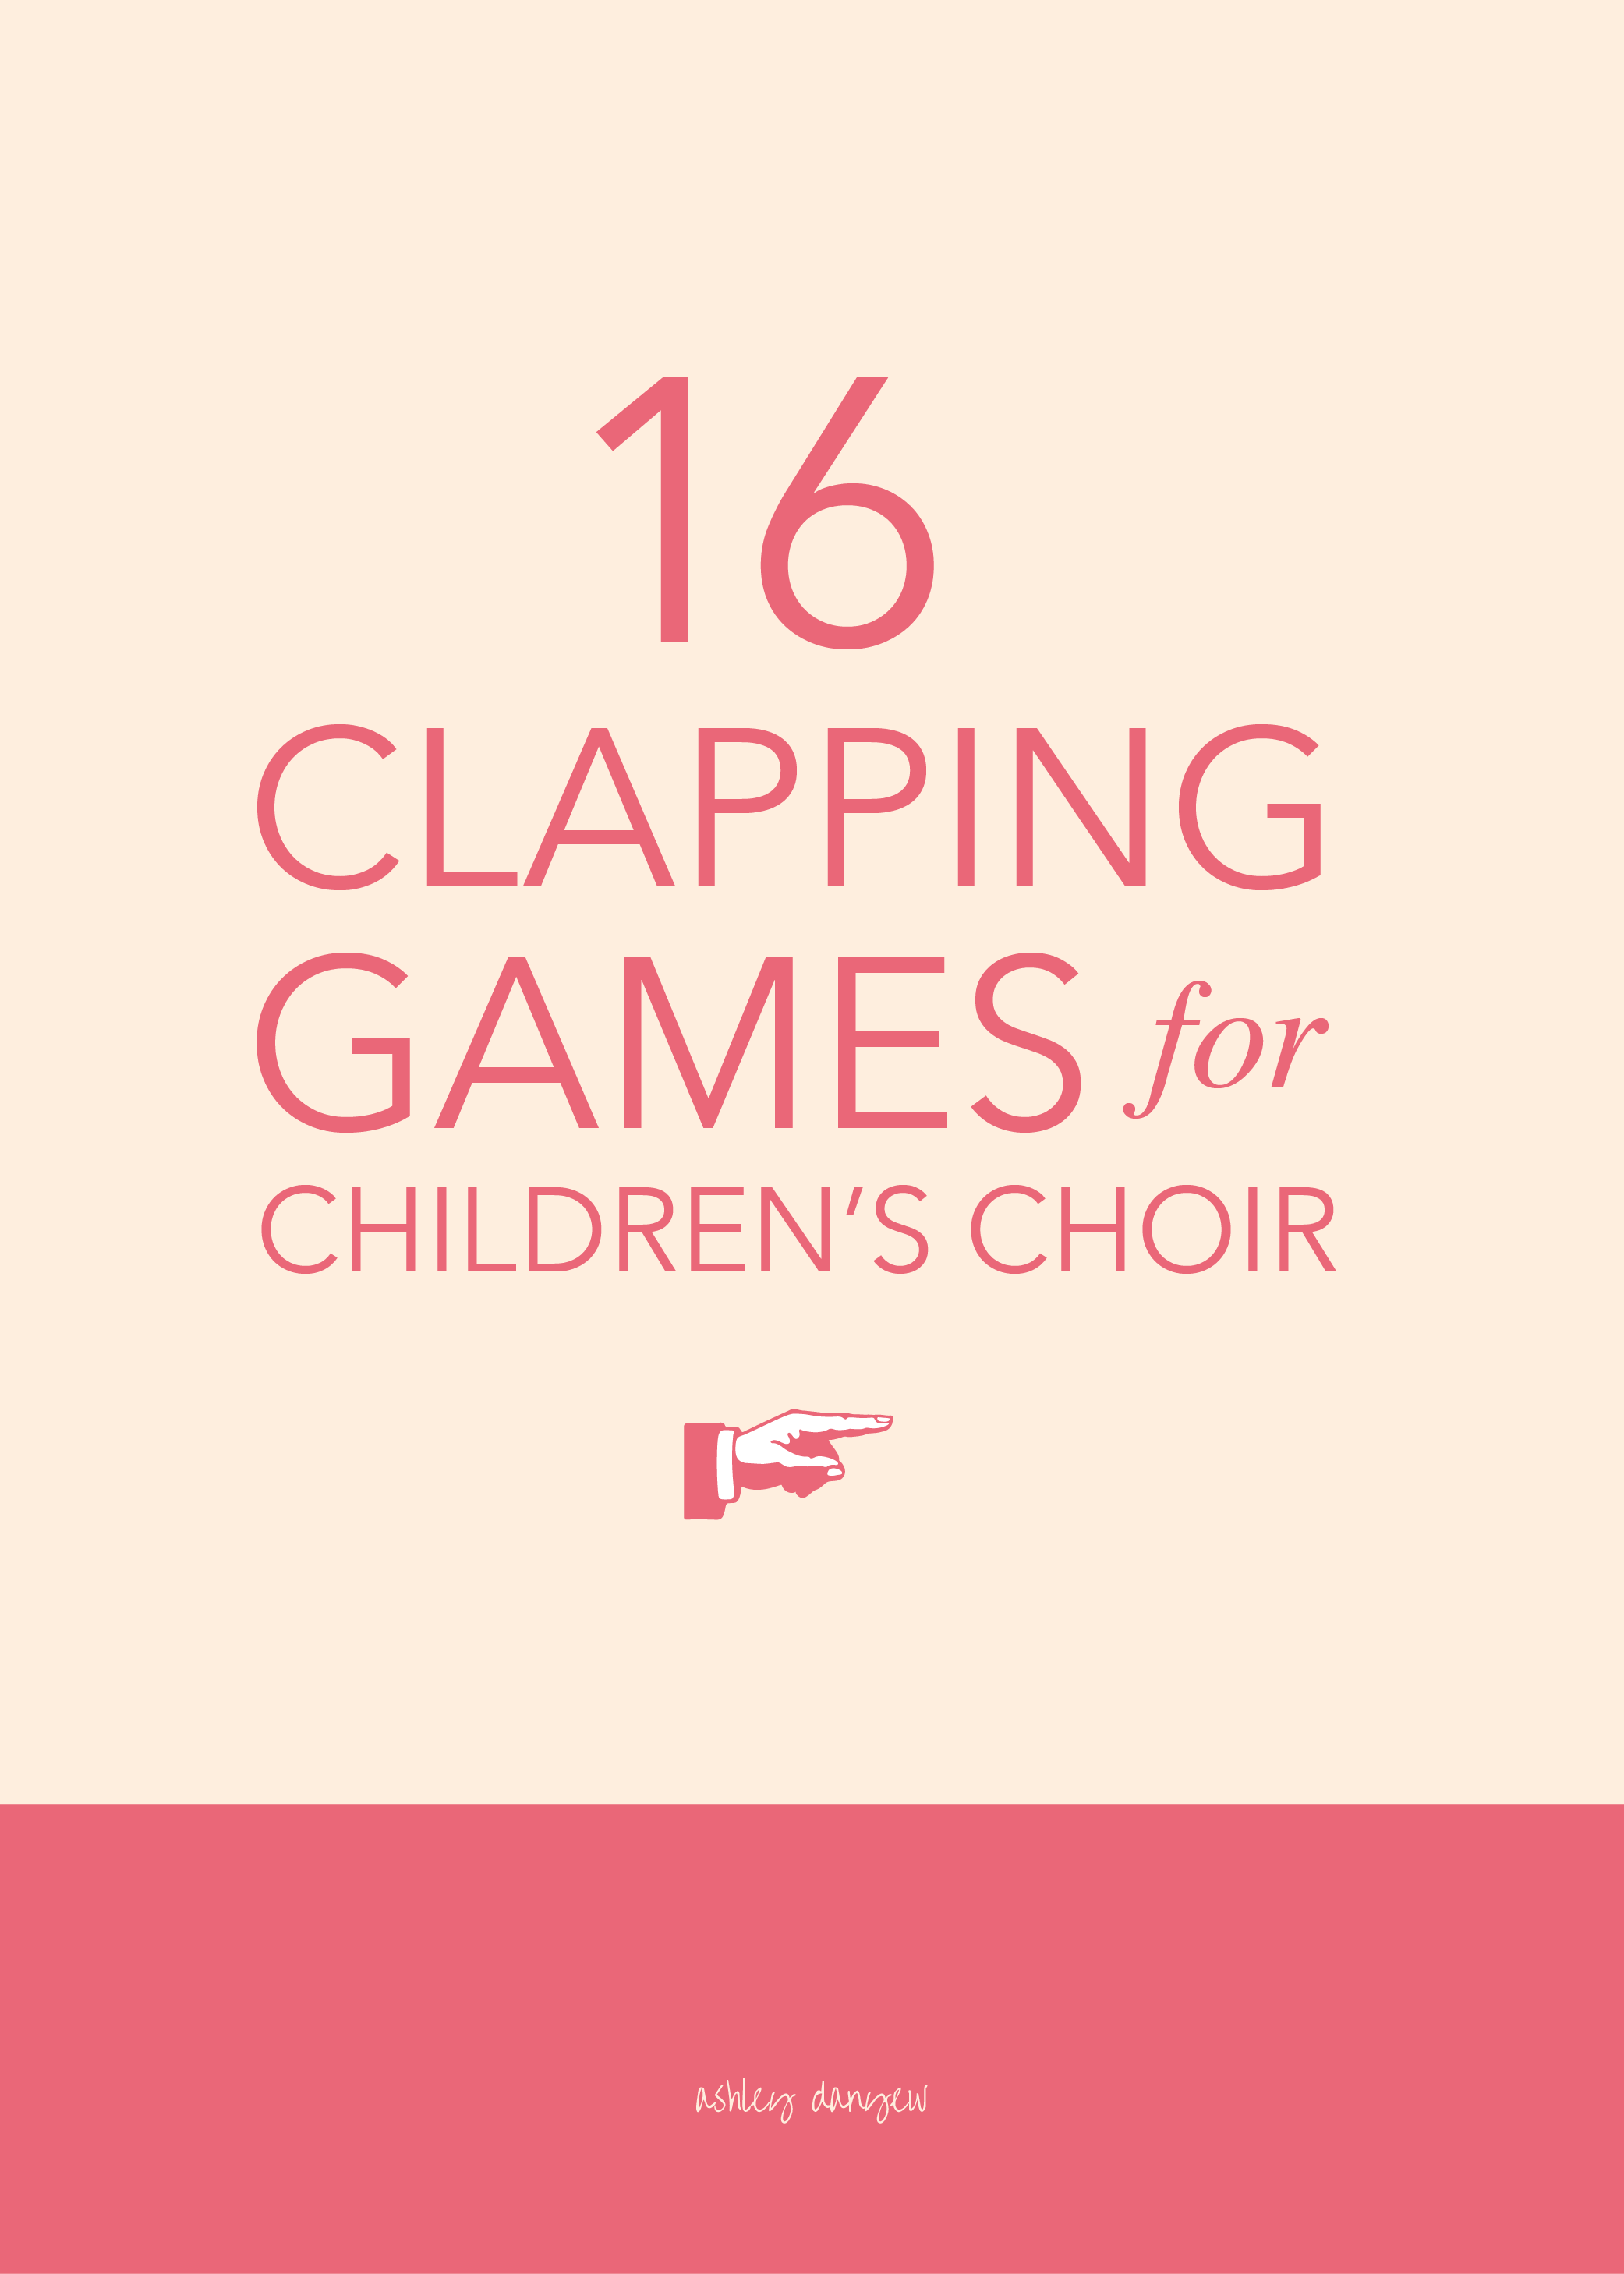 Copy of 16 Clapping Games for Children's Choir